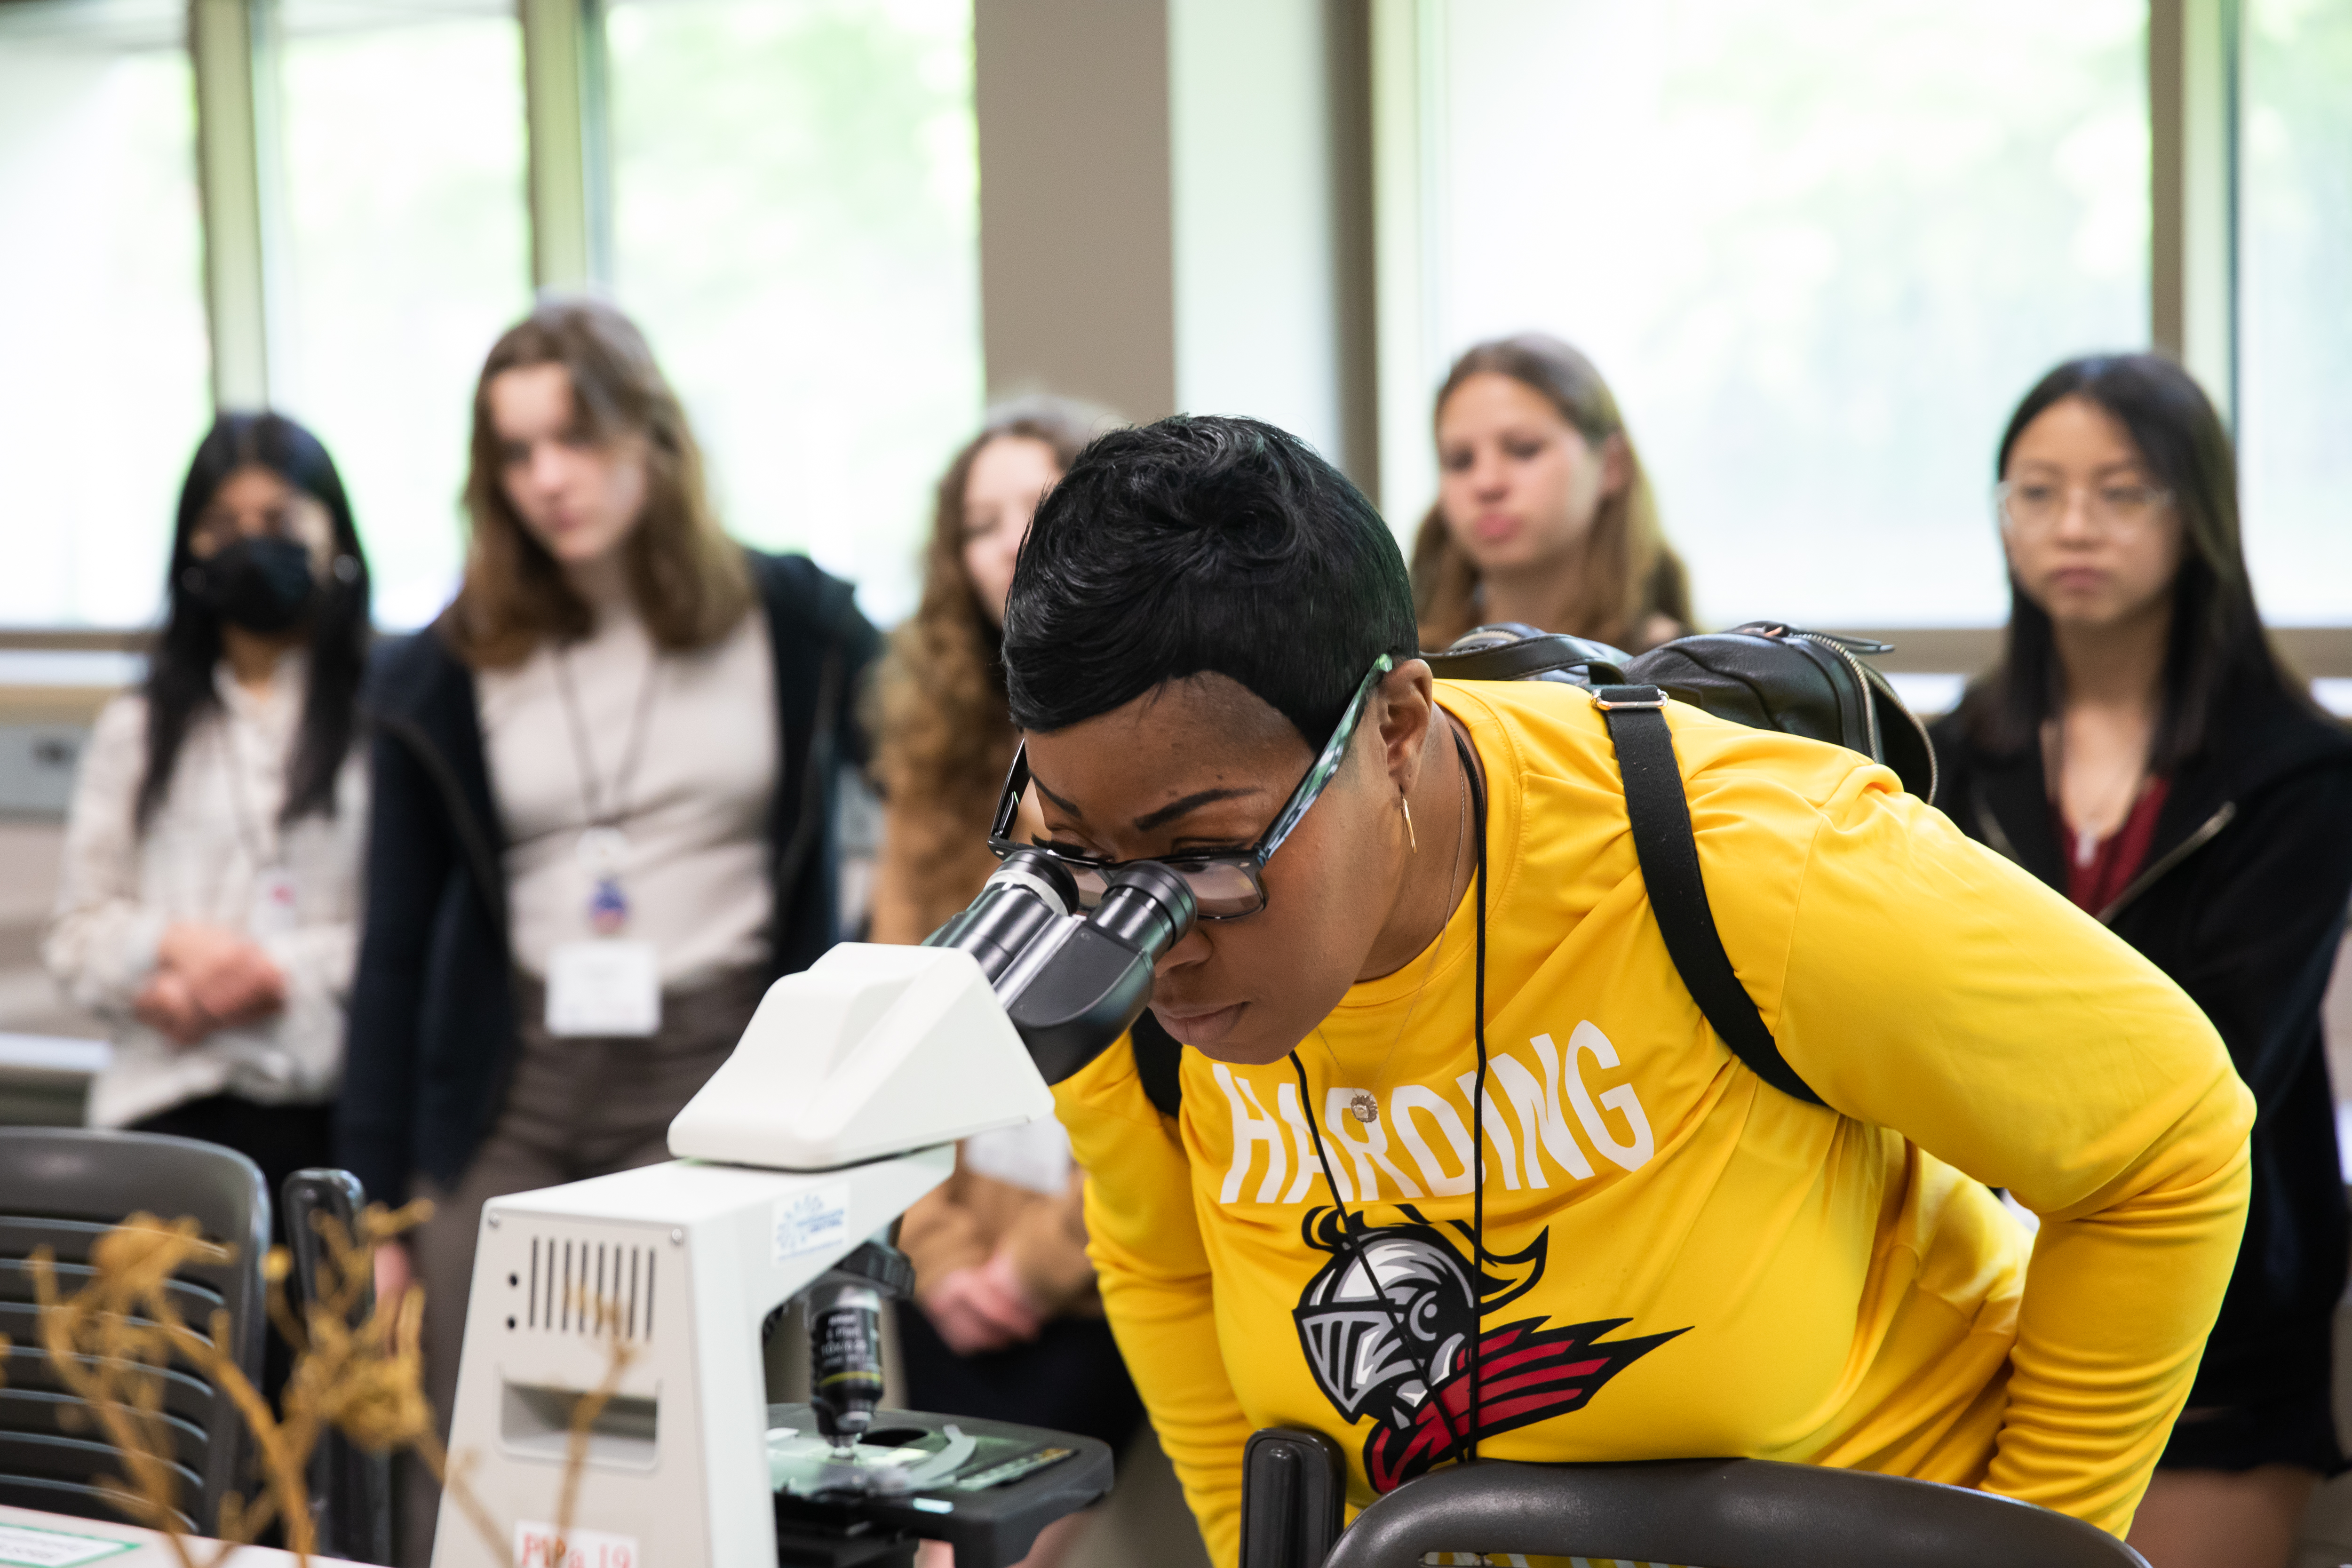 A Black woman in a yellow shirt peers into a microscope with a row of students lined behind observing